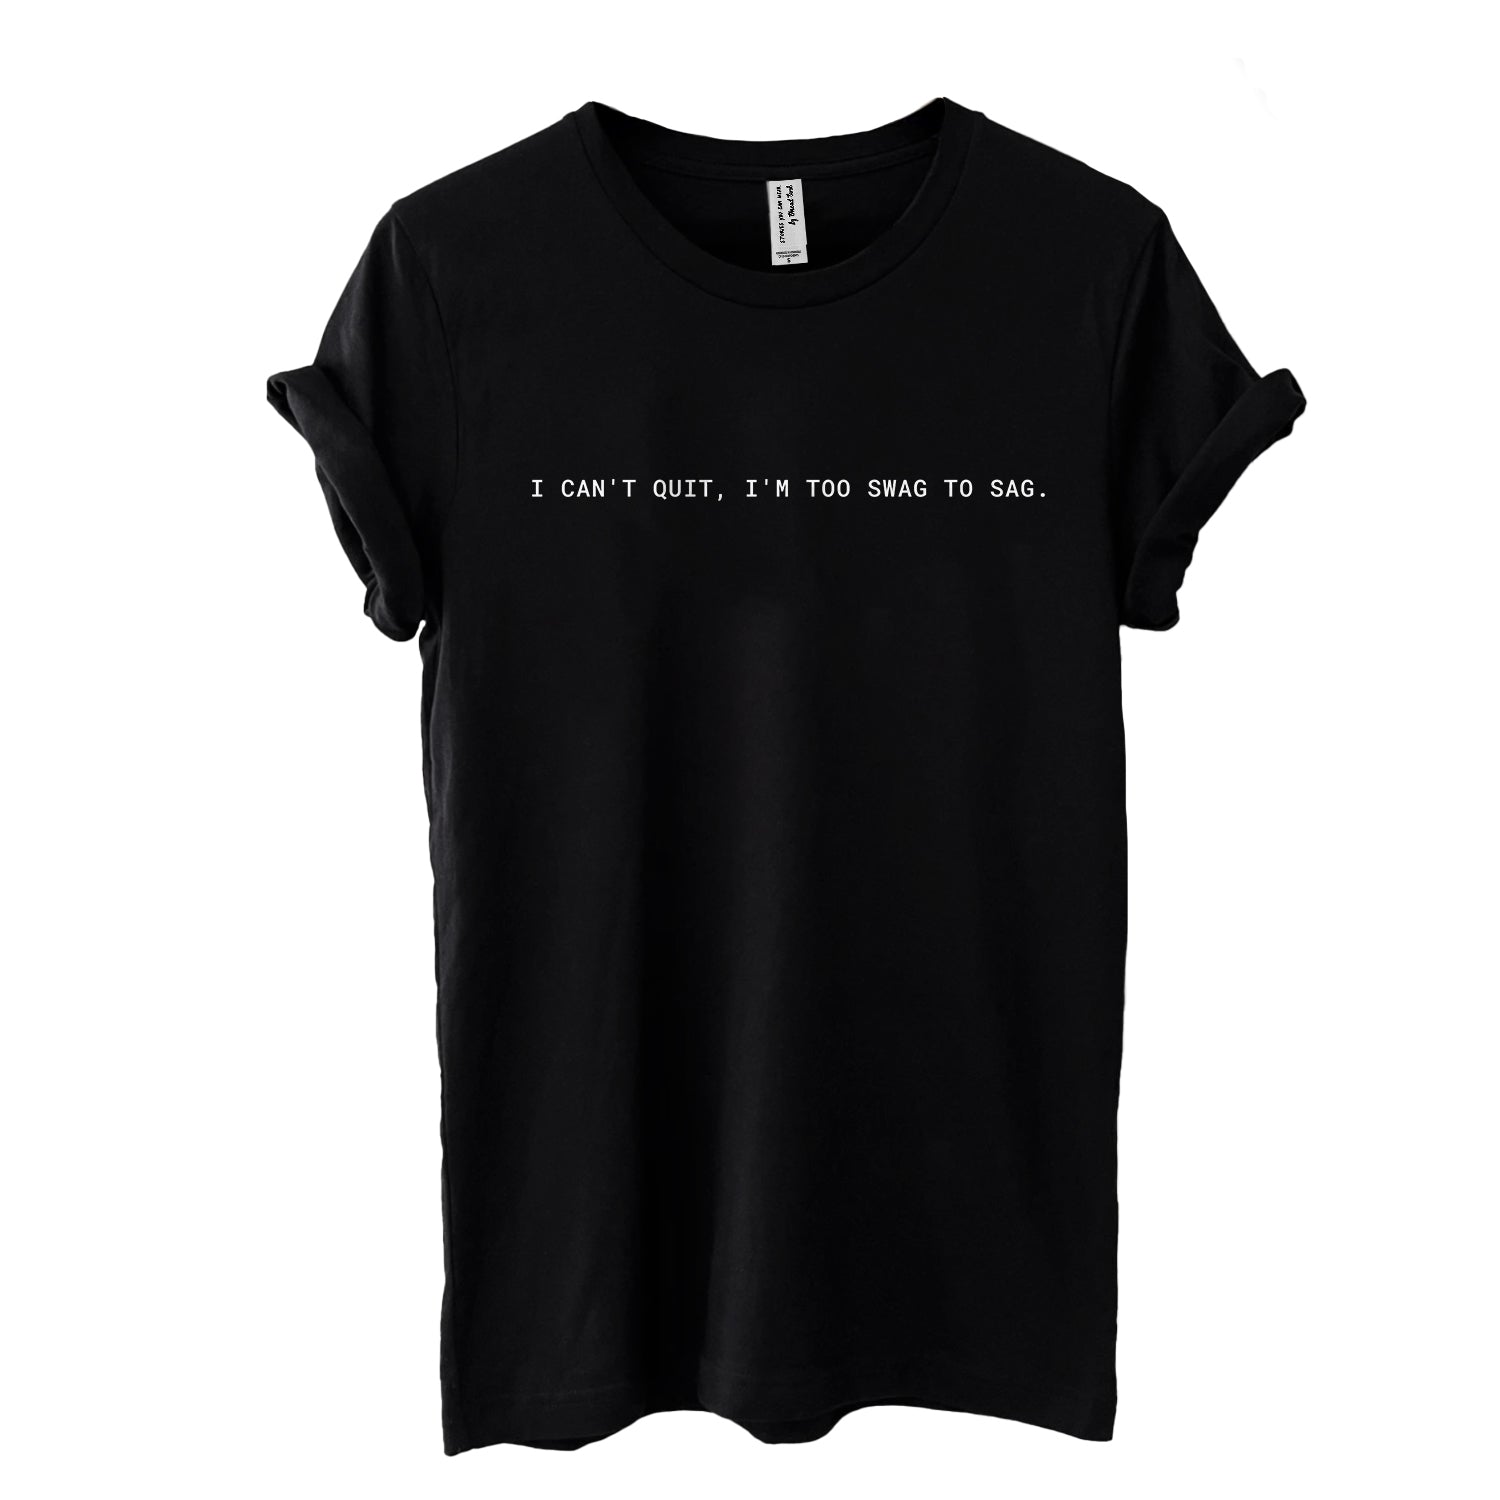 I Can't Quit, I'm Too Swag to Sag Boyfriend Crew Tee Solid Black Closeup Artwork and Texture